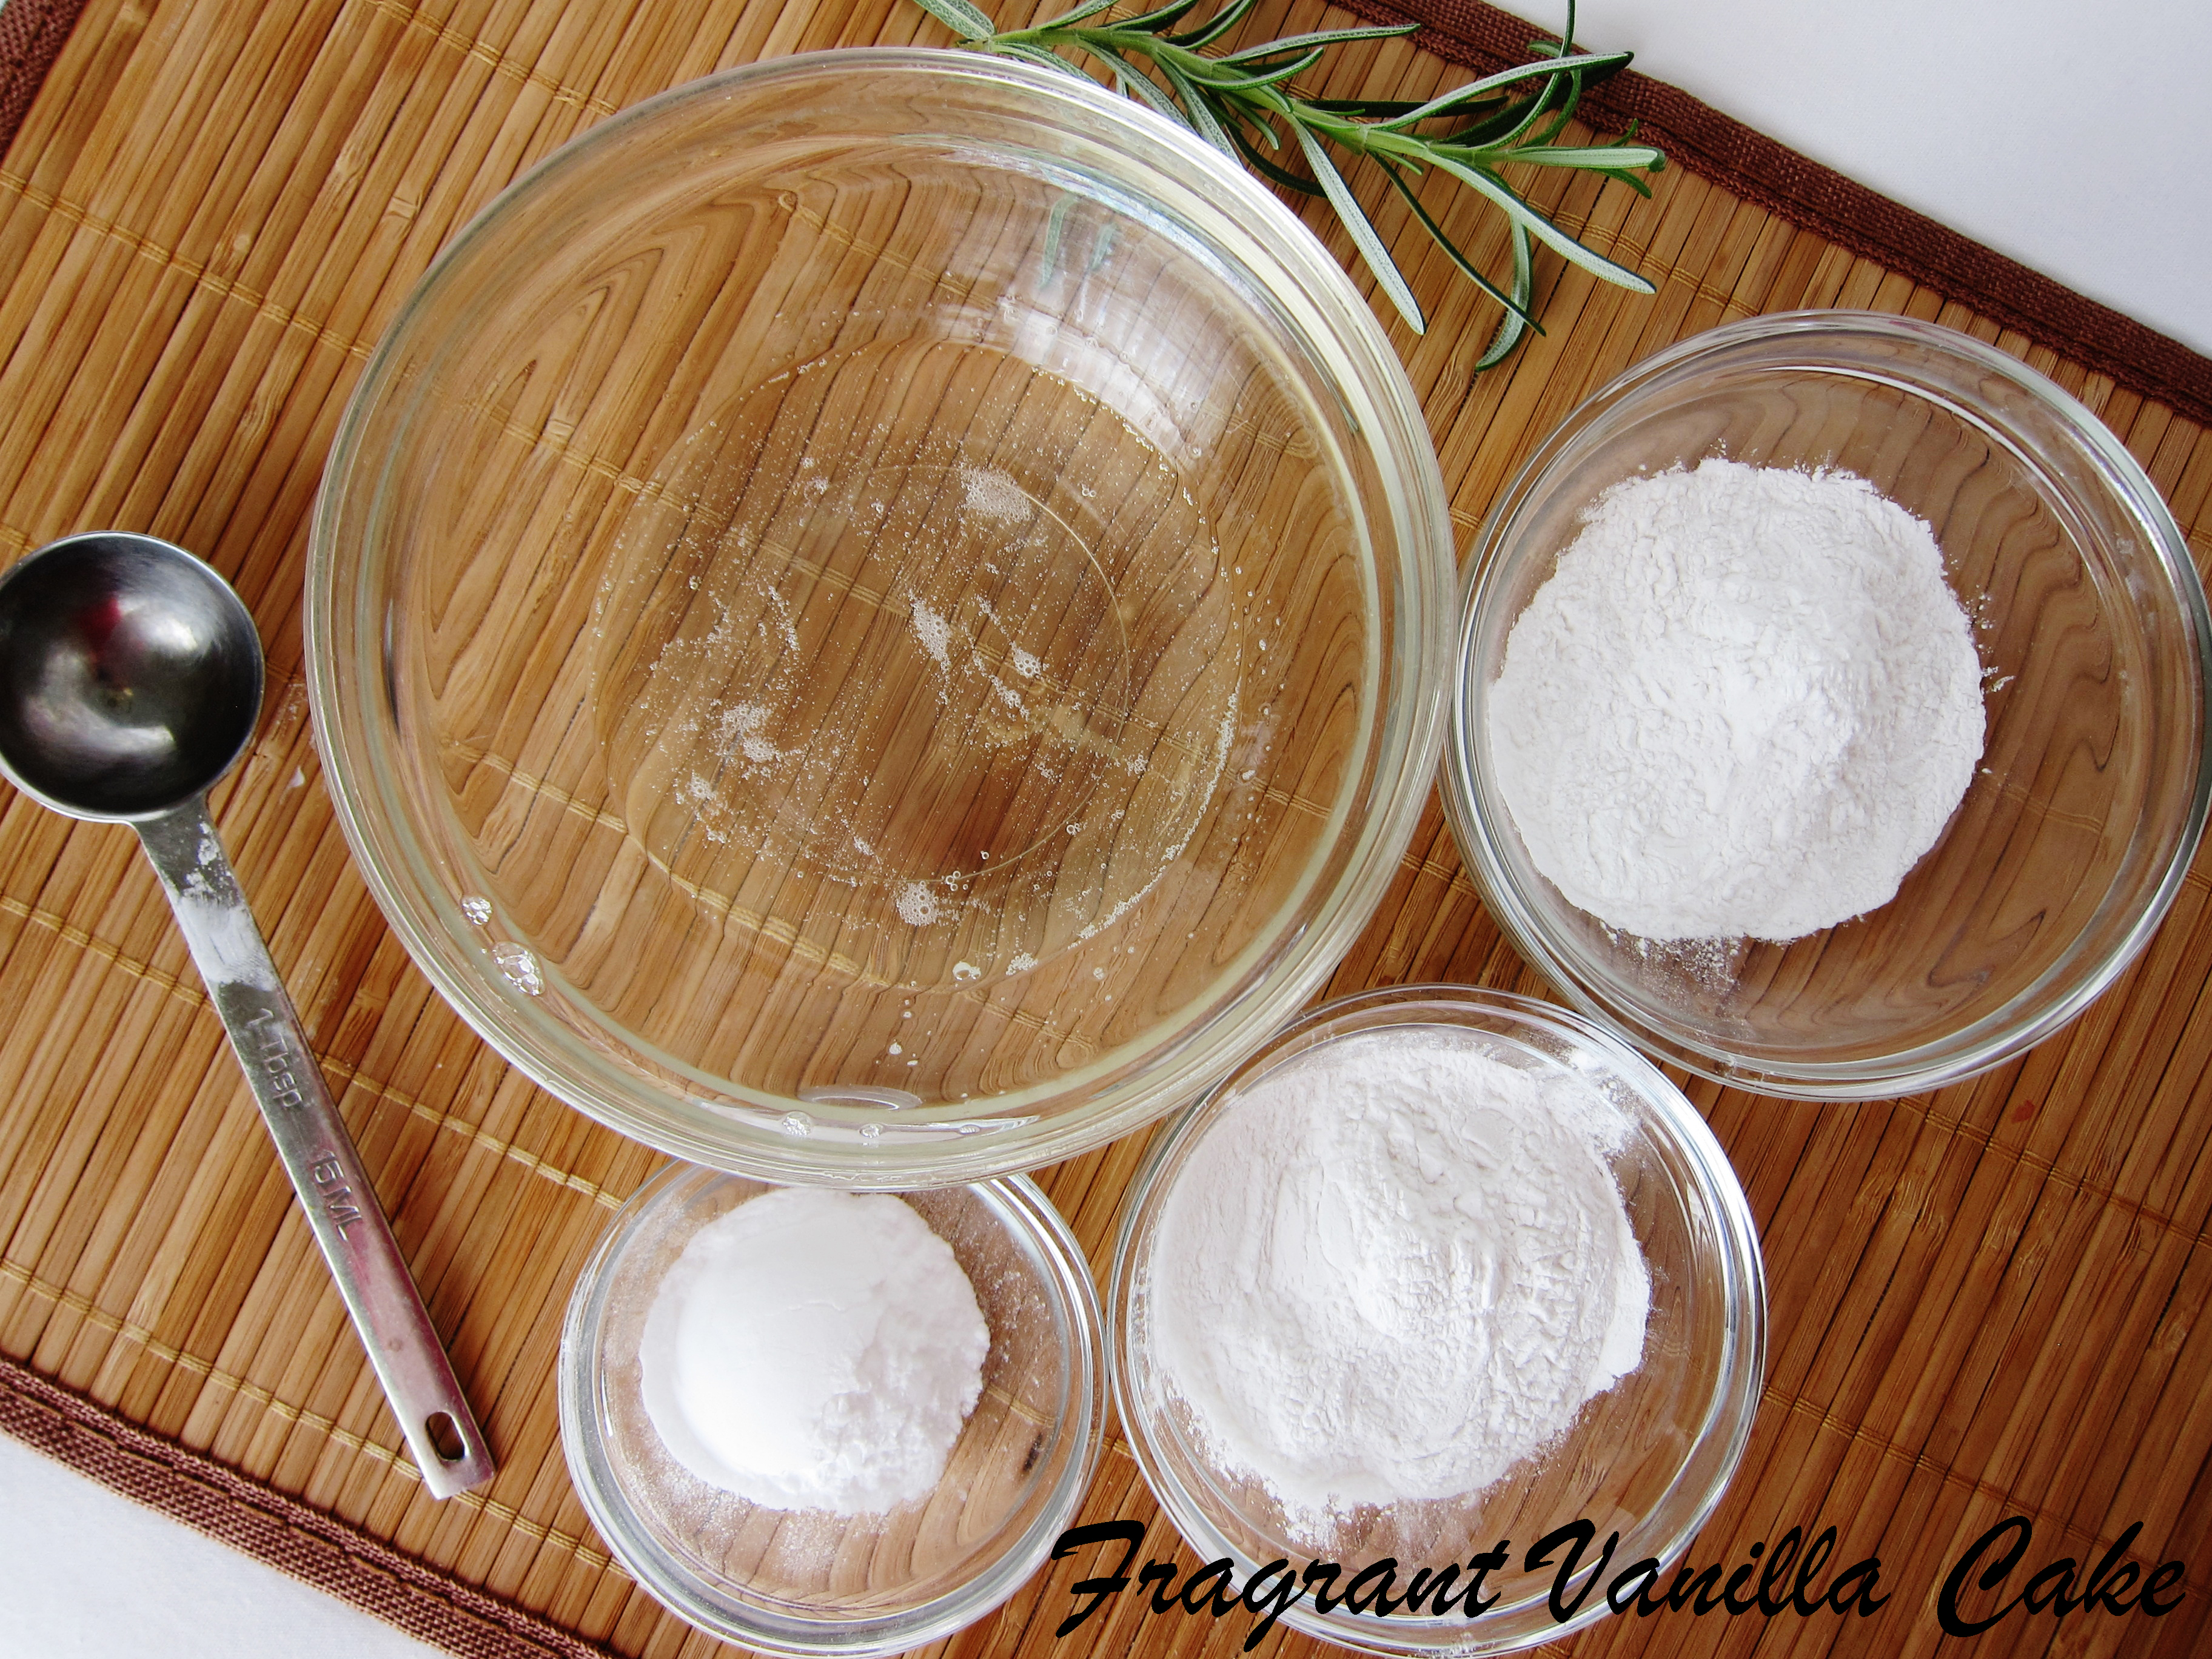 Rosemary Orange Coconut Deodorant and Reducing Chemicals in My Daily Life